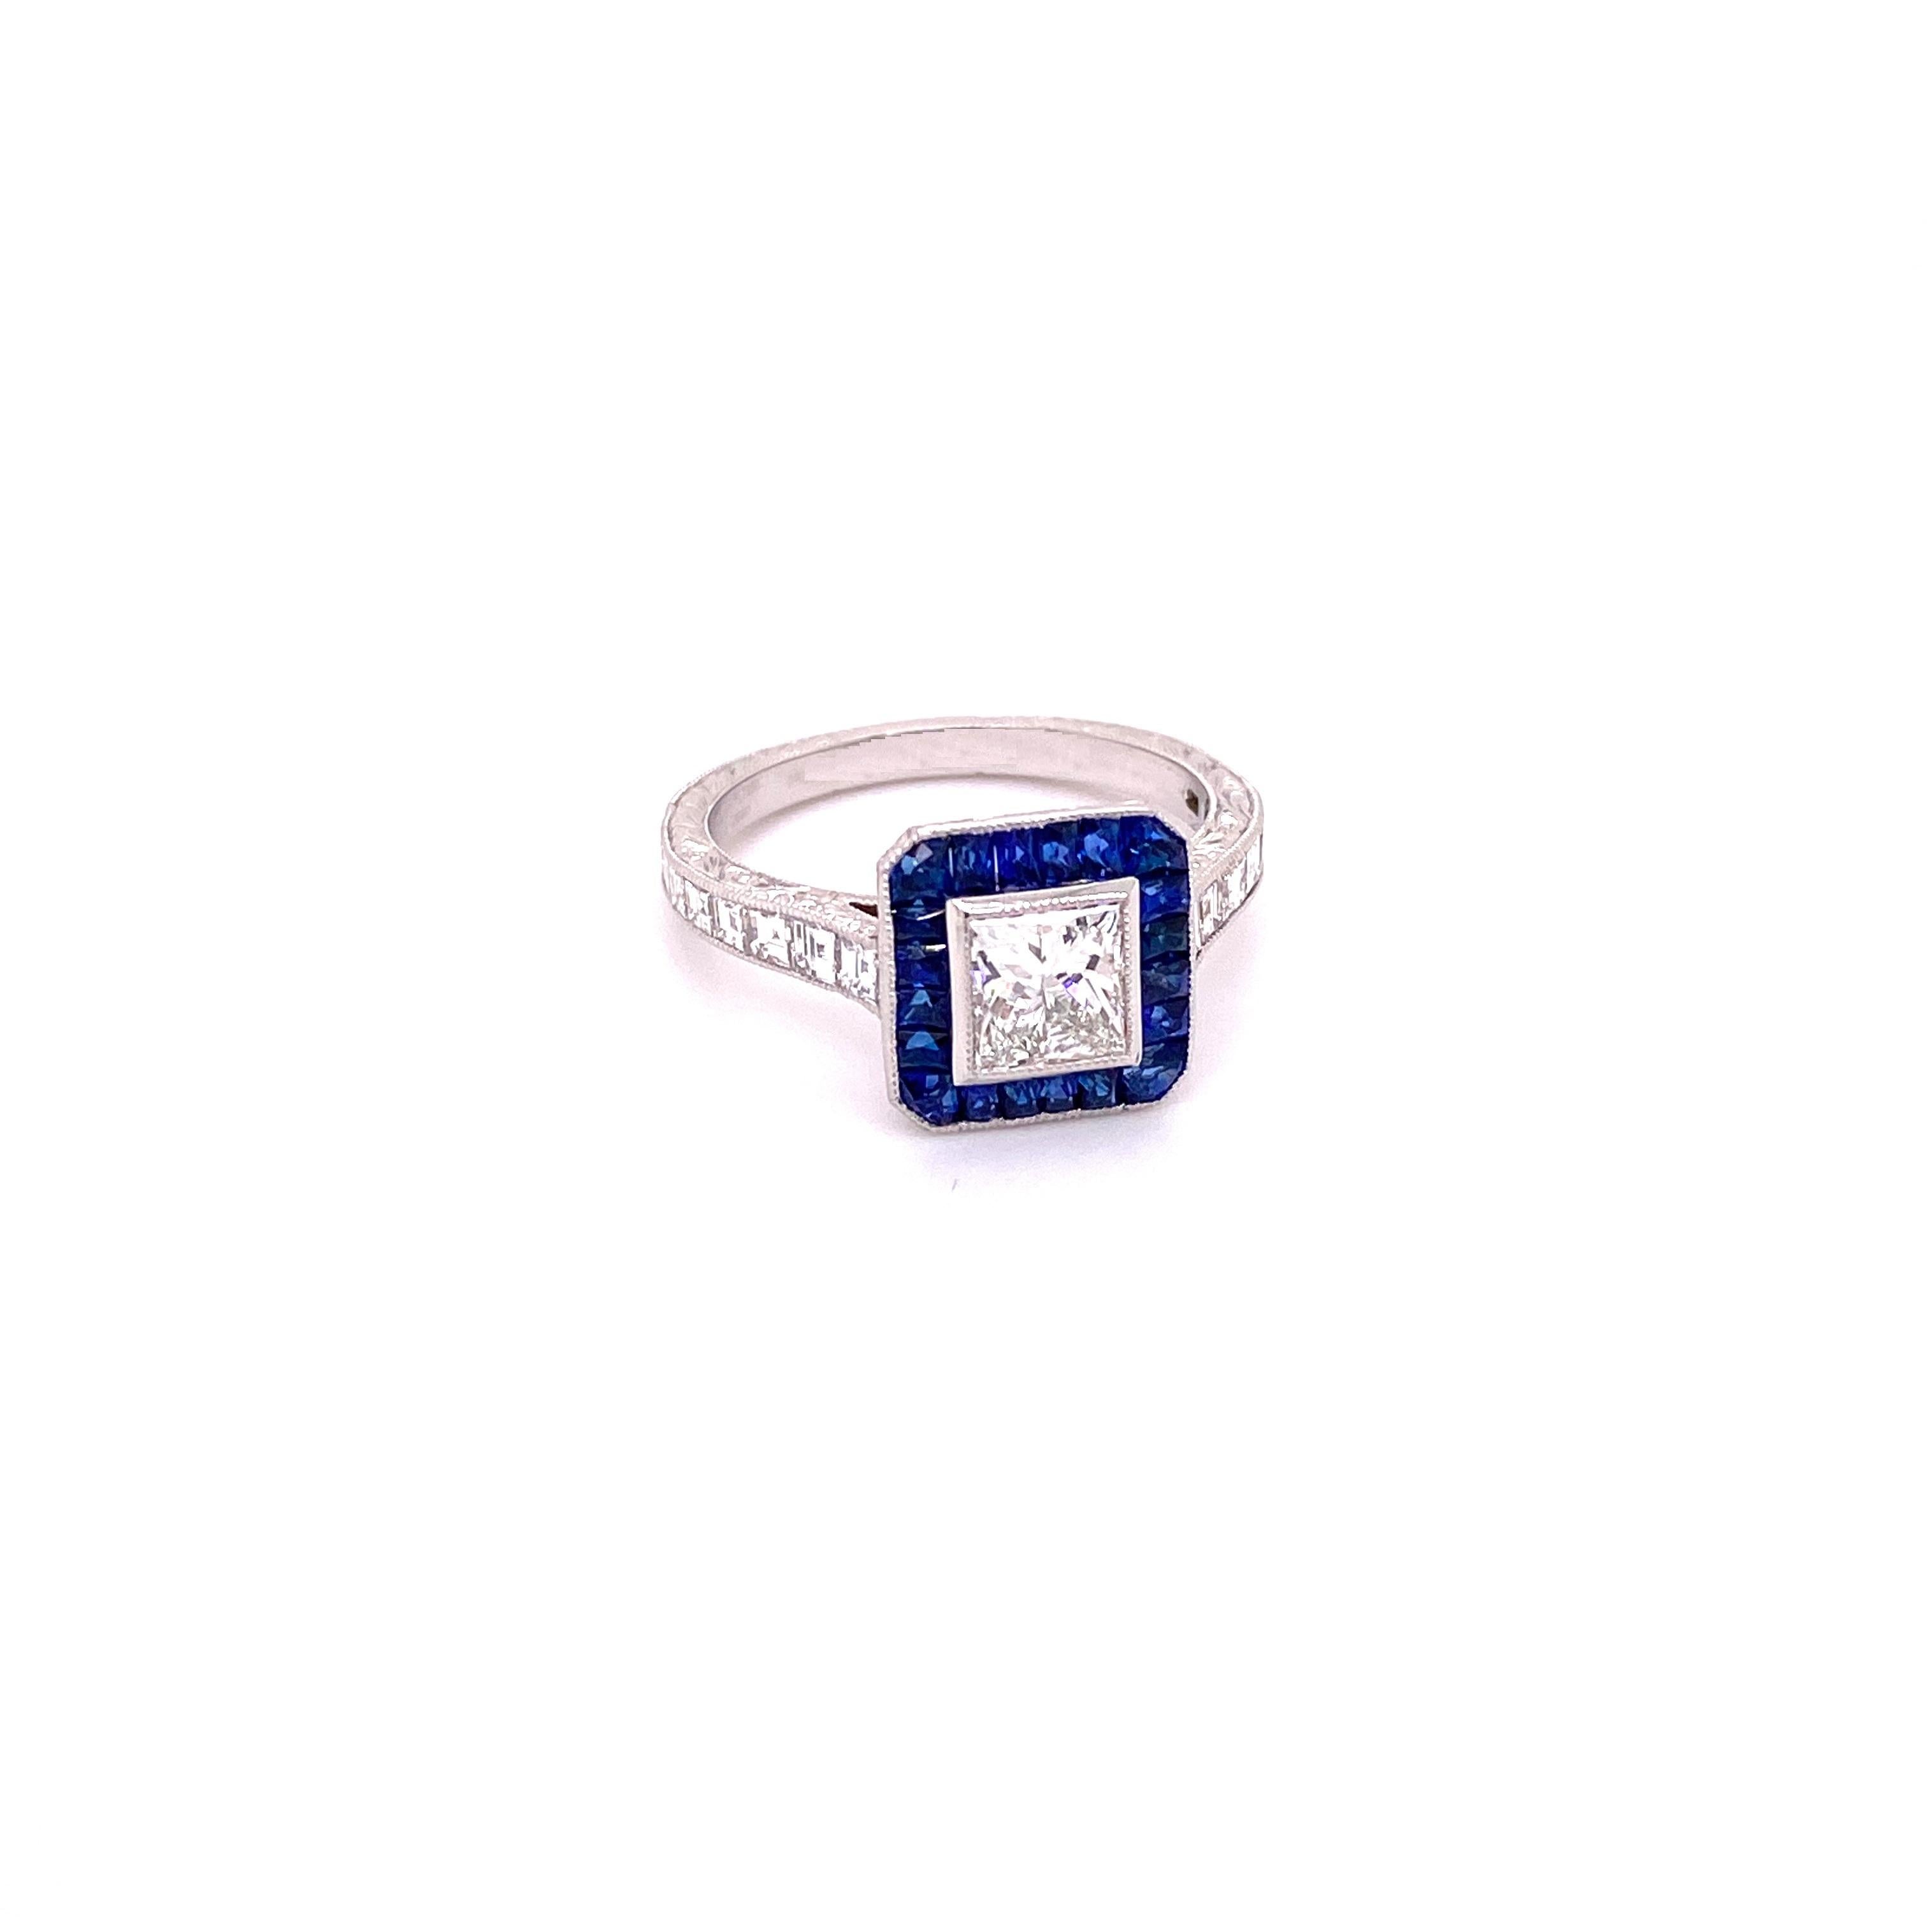 Princess Cut Diamond Ring with French cut Baguette Sapphires
Metal: Platinum
Diamond Info: 
      1 Princess Cut Diamond F VVS2, 0.82 ct
      16 Square Baguette Diamonds 0.68 ct
Total Diamond Weight: 1.50 cwt.
Stone info:
      20 French Cut